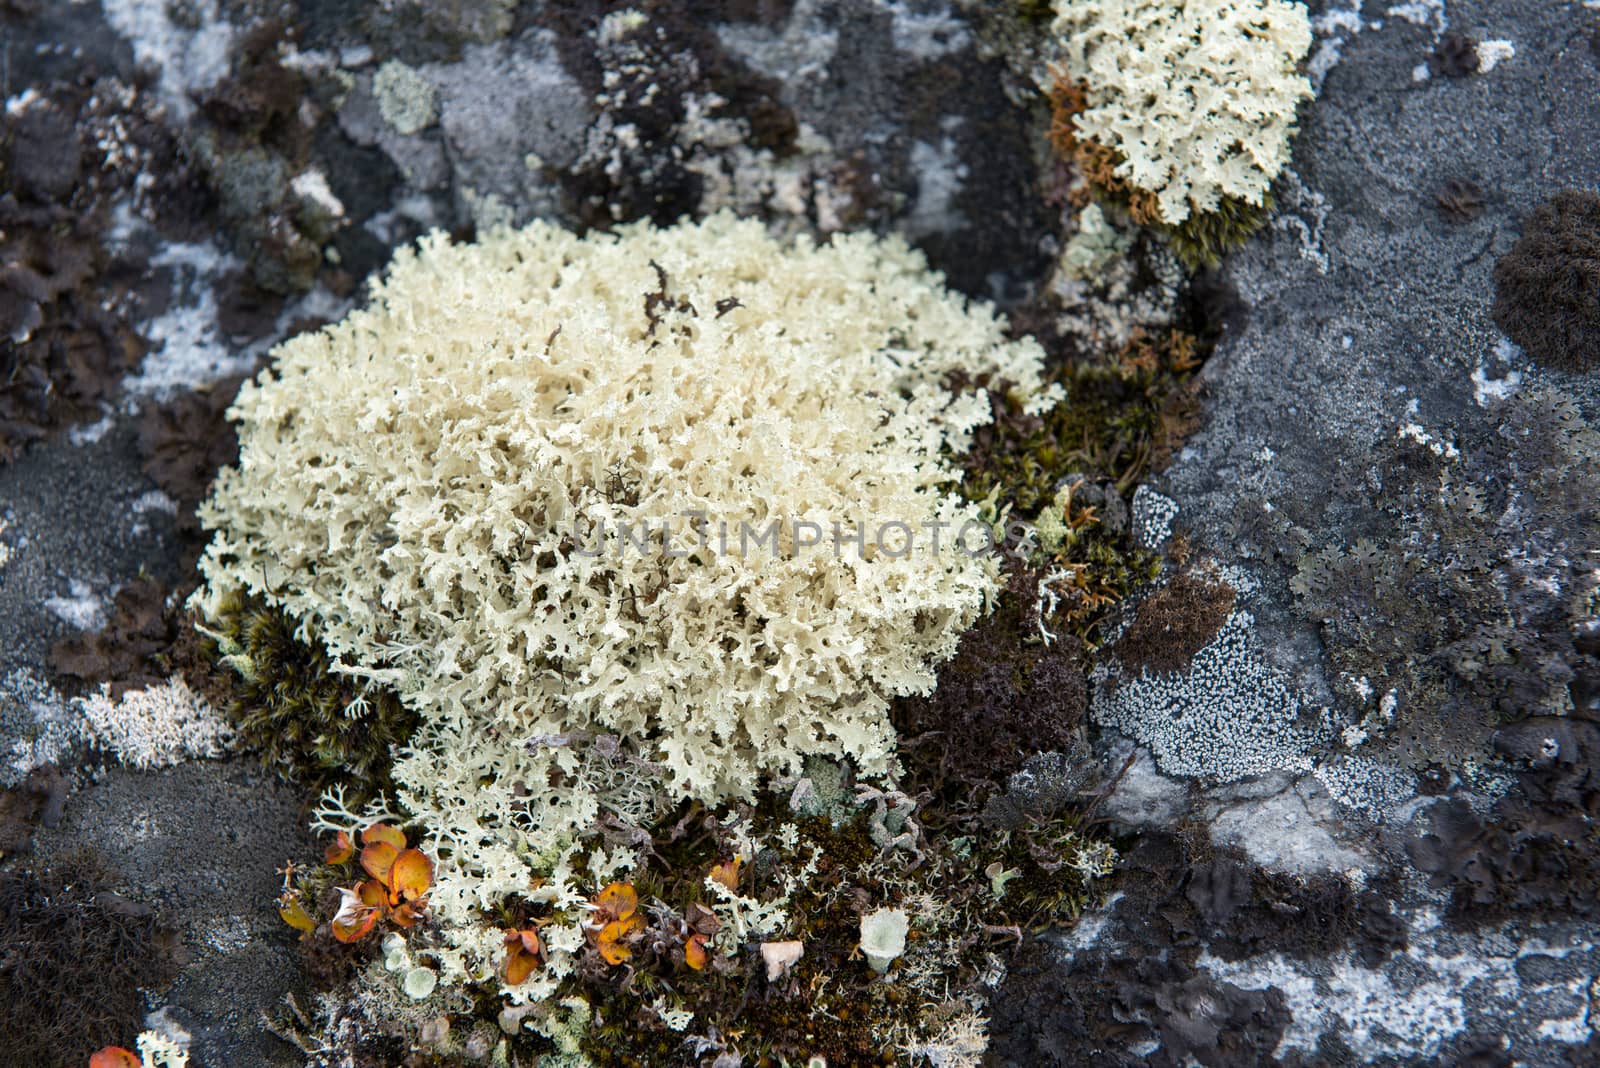 Detail of lichen and tundra vegetation in Greenland during summer